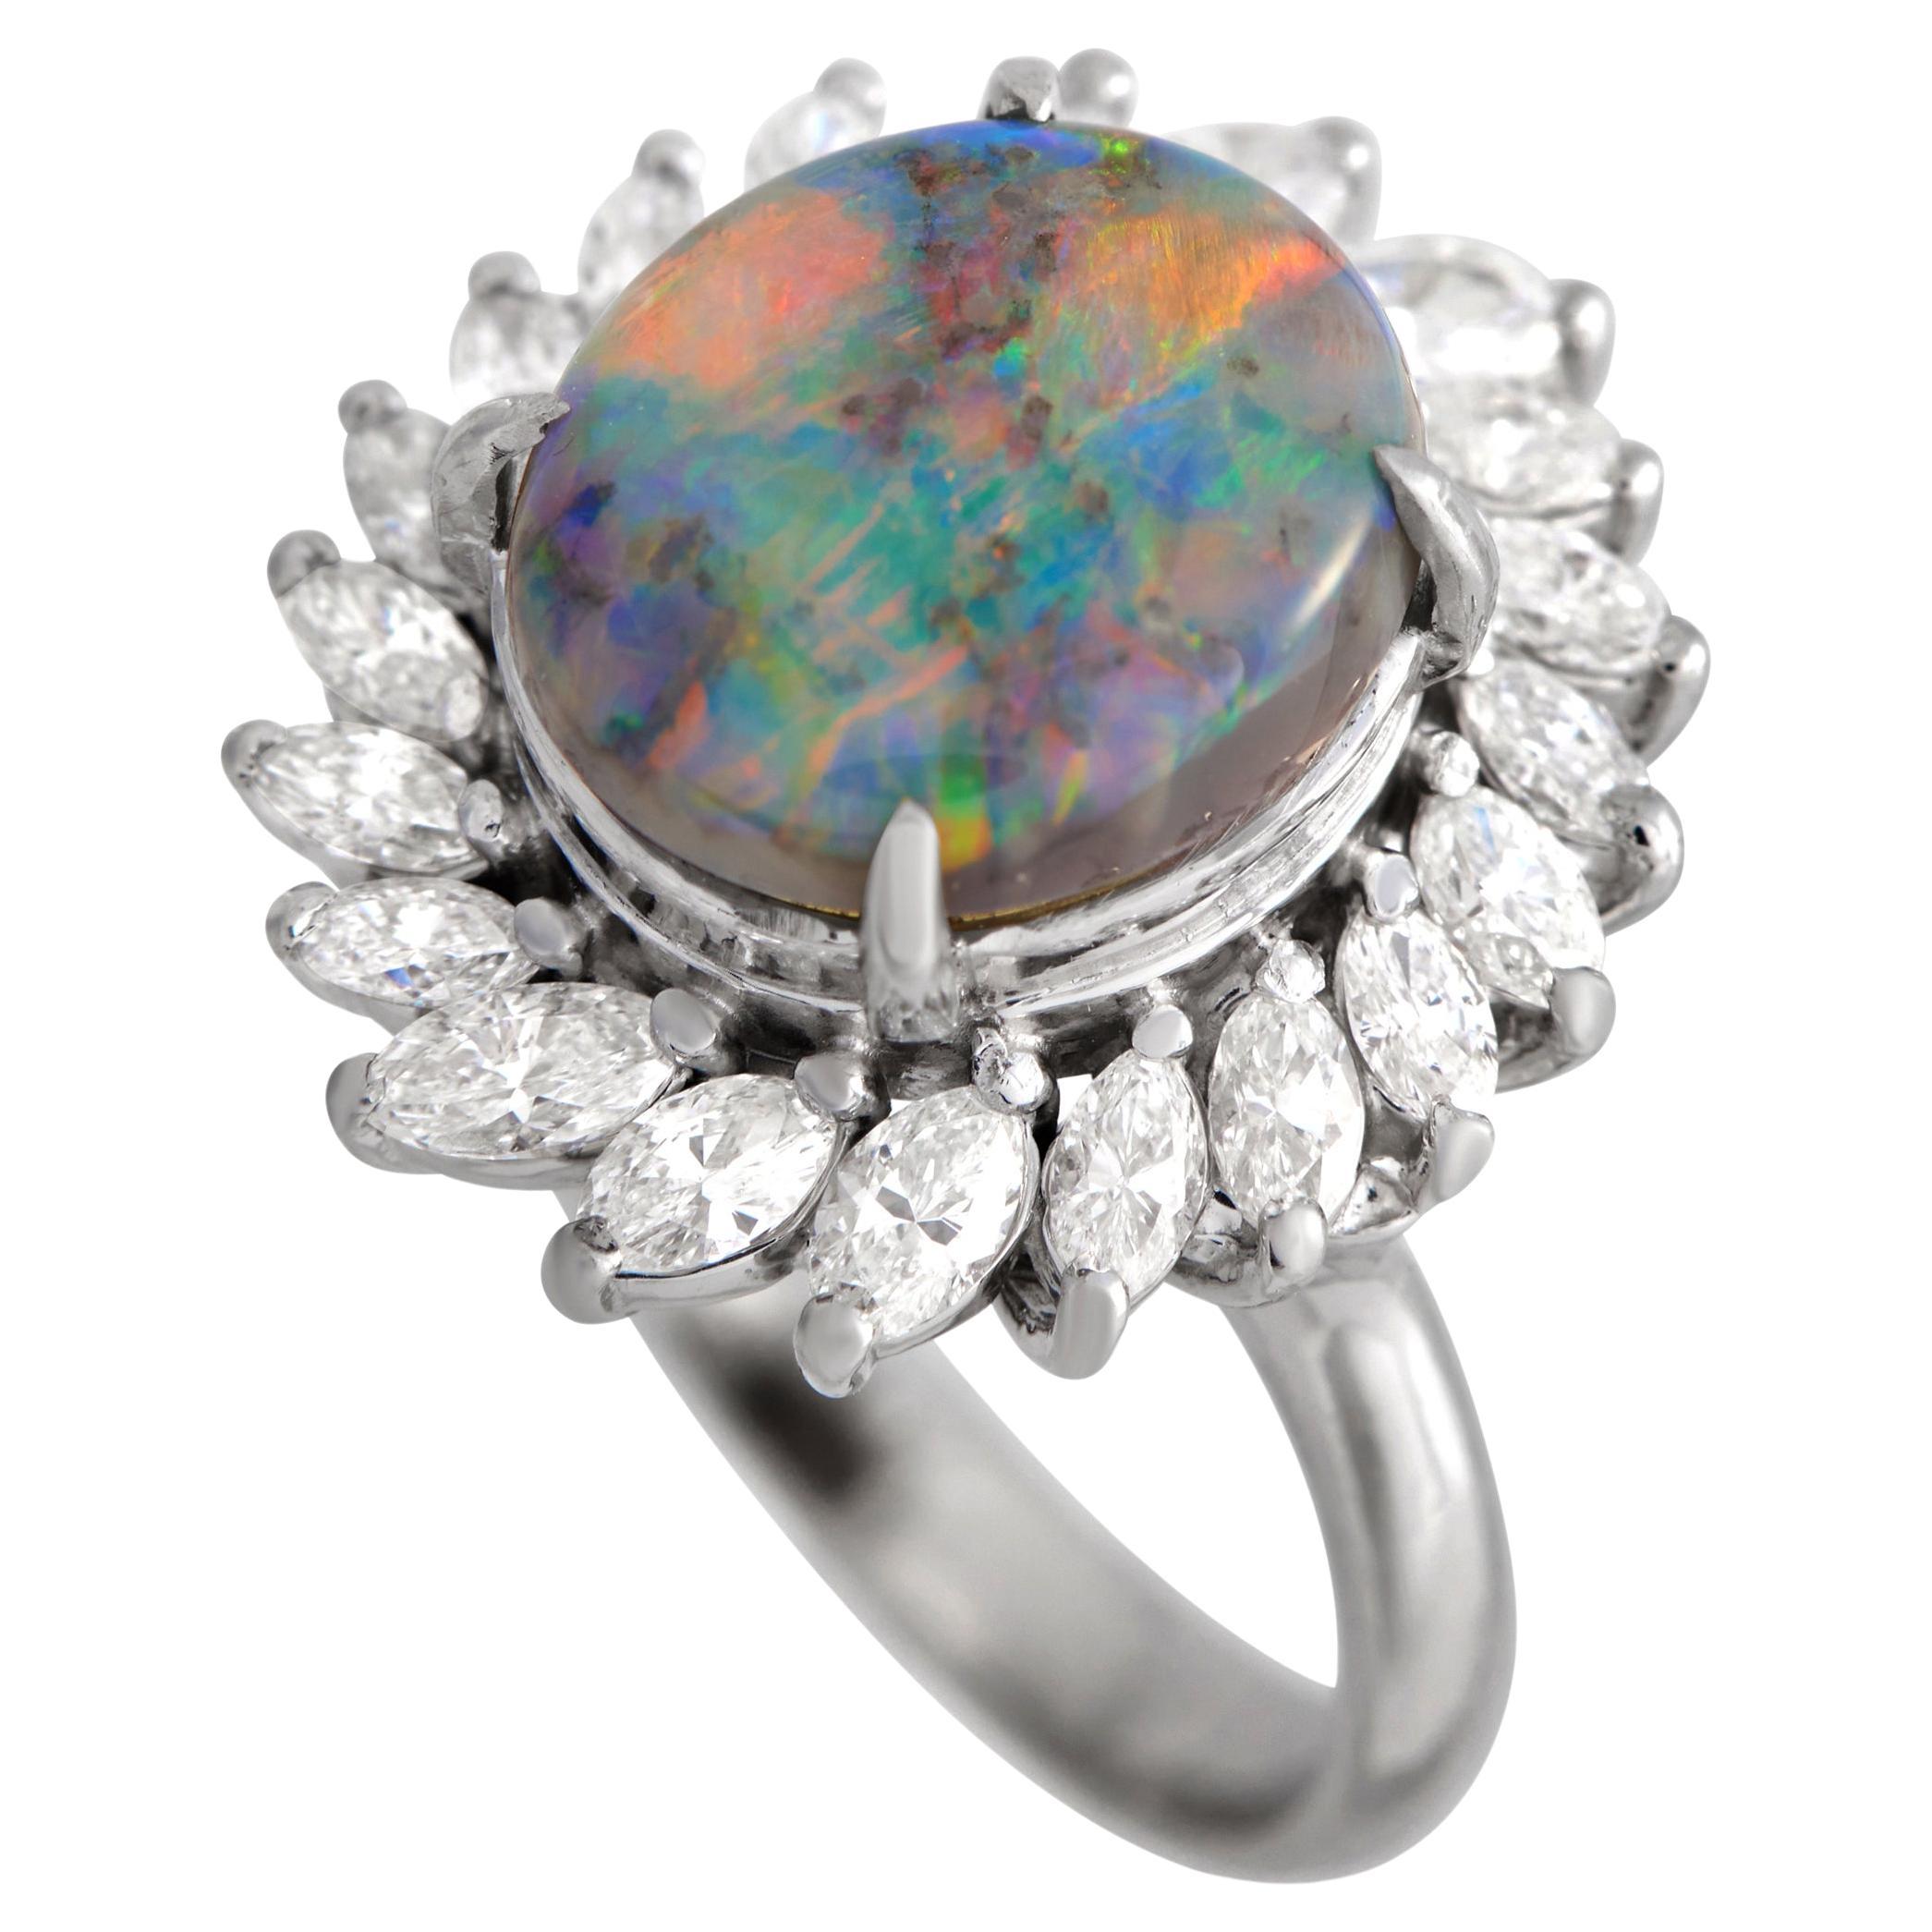 LB Exclusive Platinum 0.80ct Diamond and Opal Ring MF28-101123